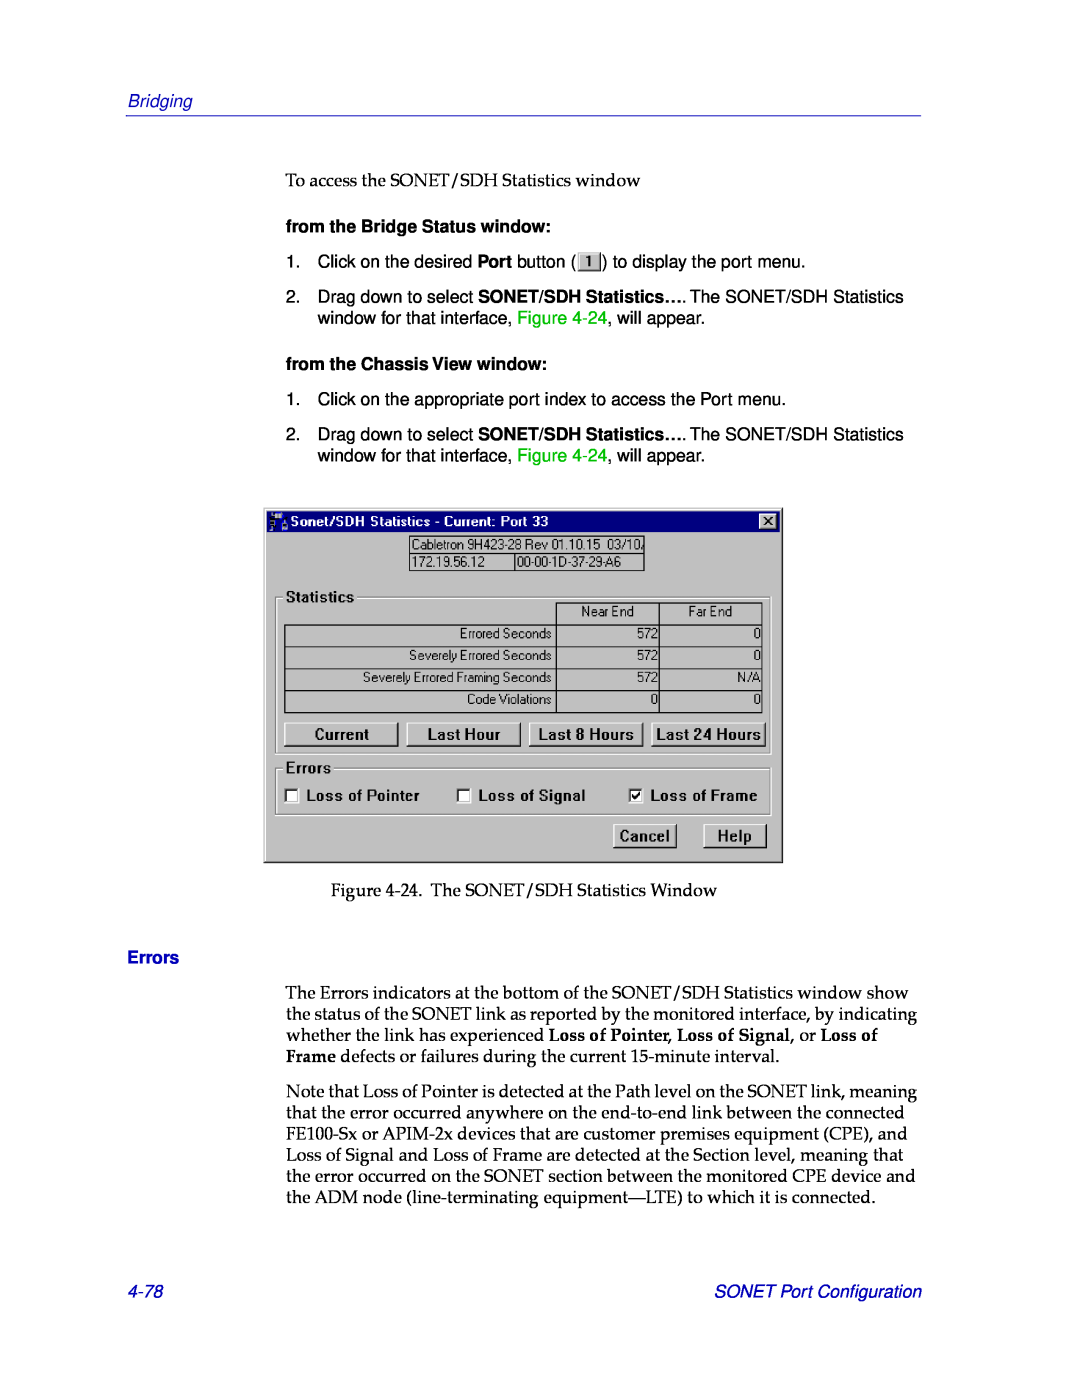 Cabletron Systems CSX400, CSX200 manual 4-78, Bridging, from the Bridge Status window, from the Chassis View window, Errors 